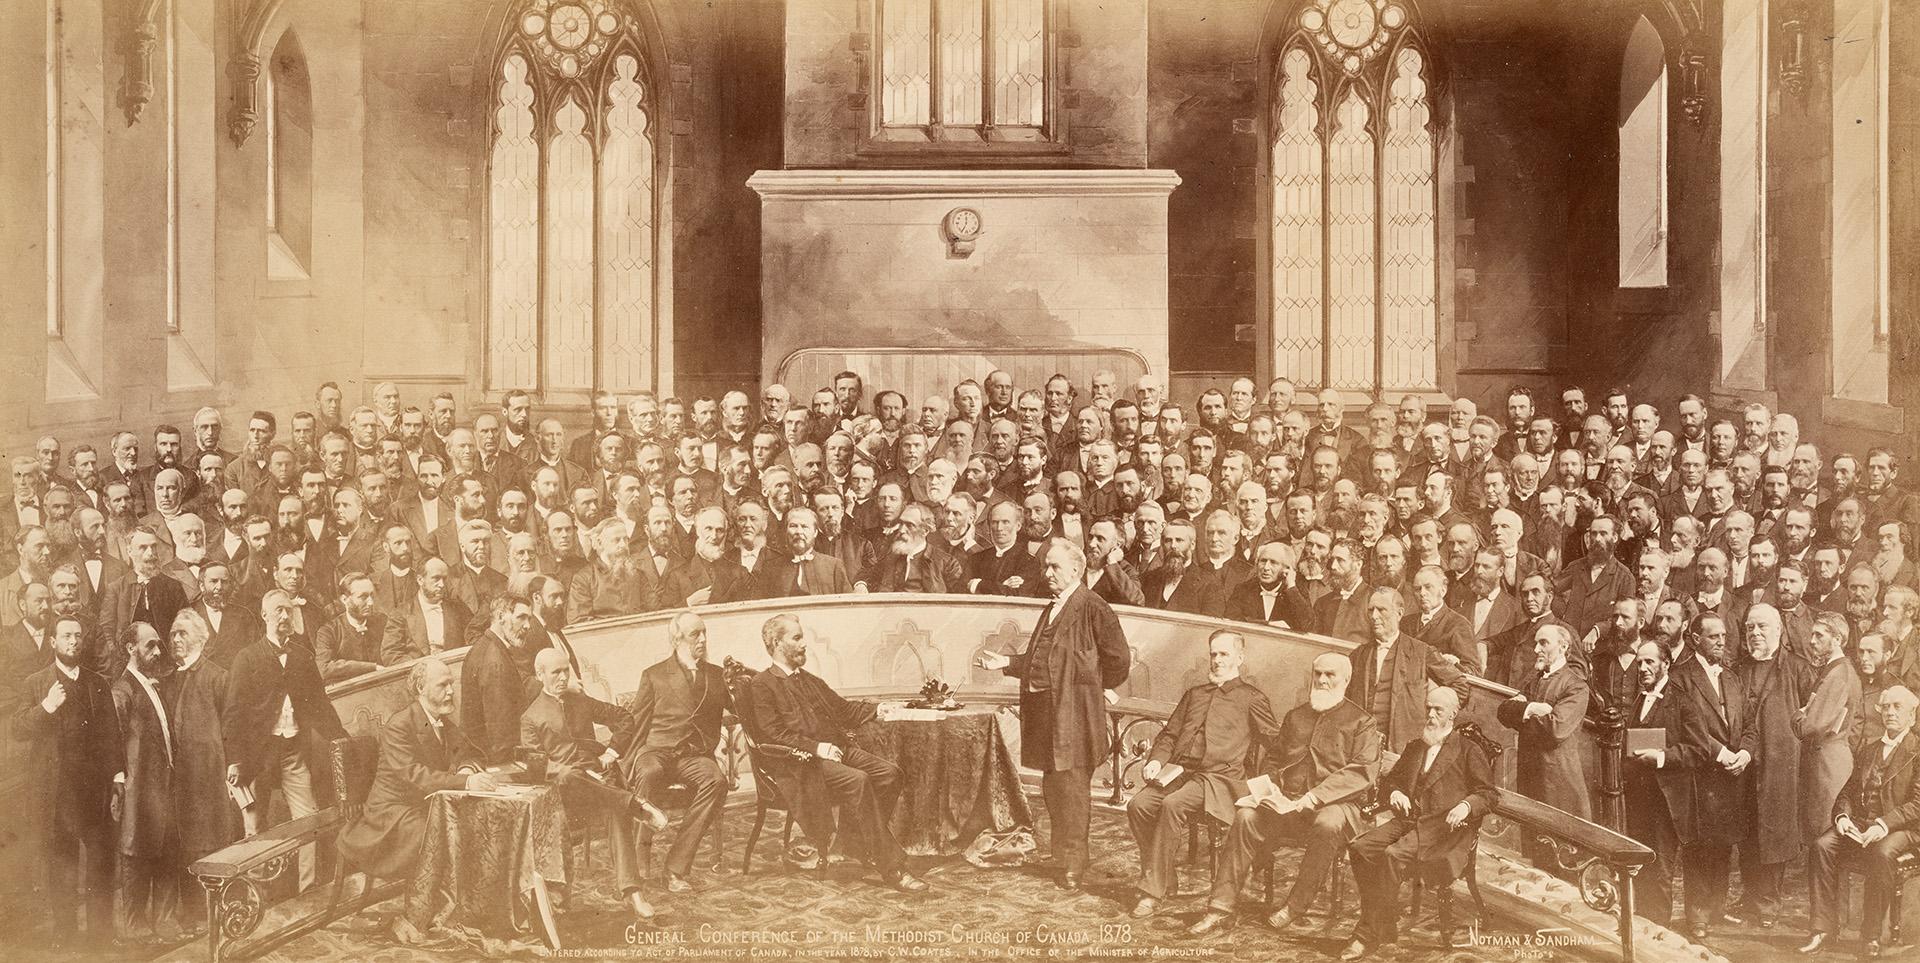 A composite photograph of a conference meeting taking place in a church, with several dozen men ...